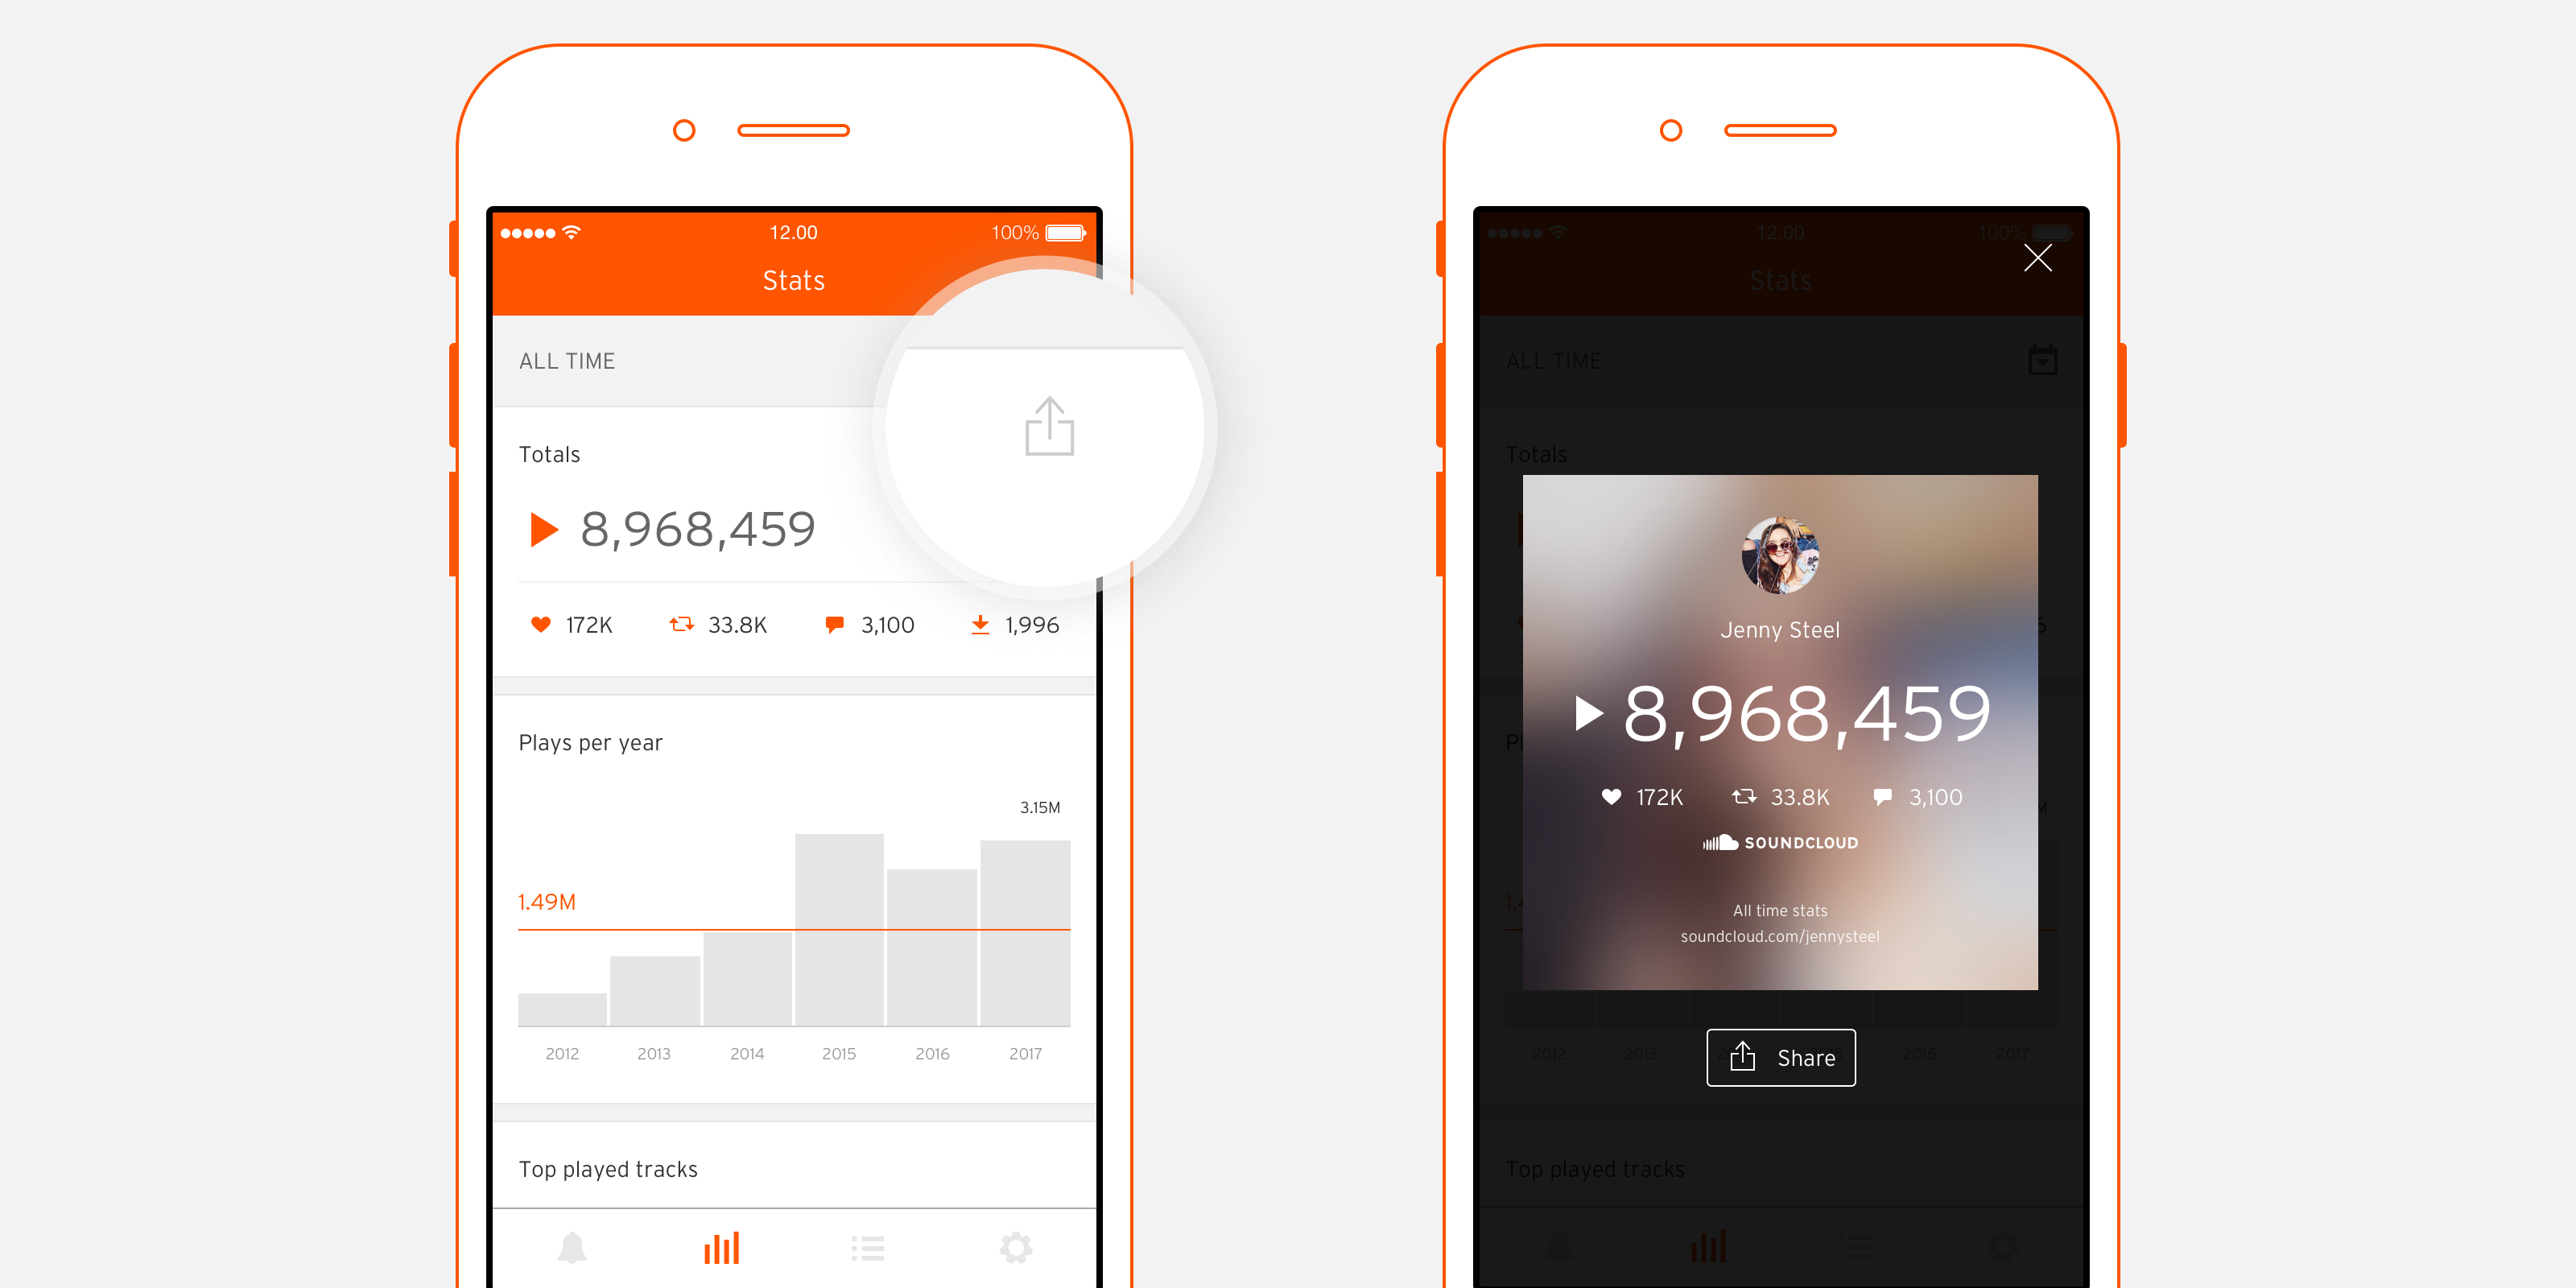 SoundCloud adds sharing for stats so you can celebrate milestones with fans